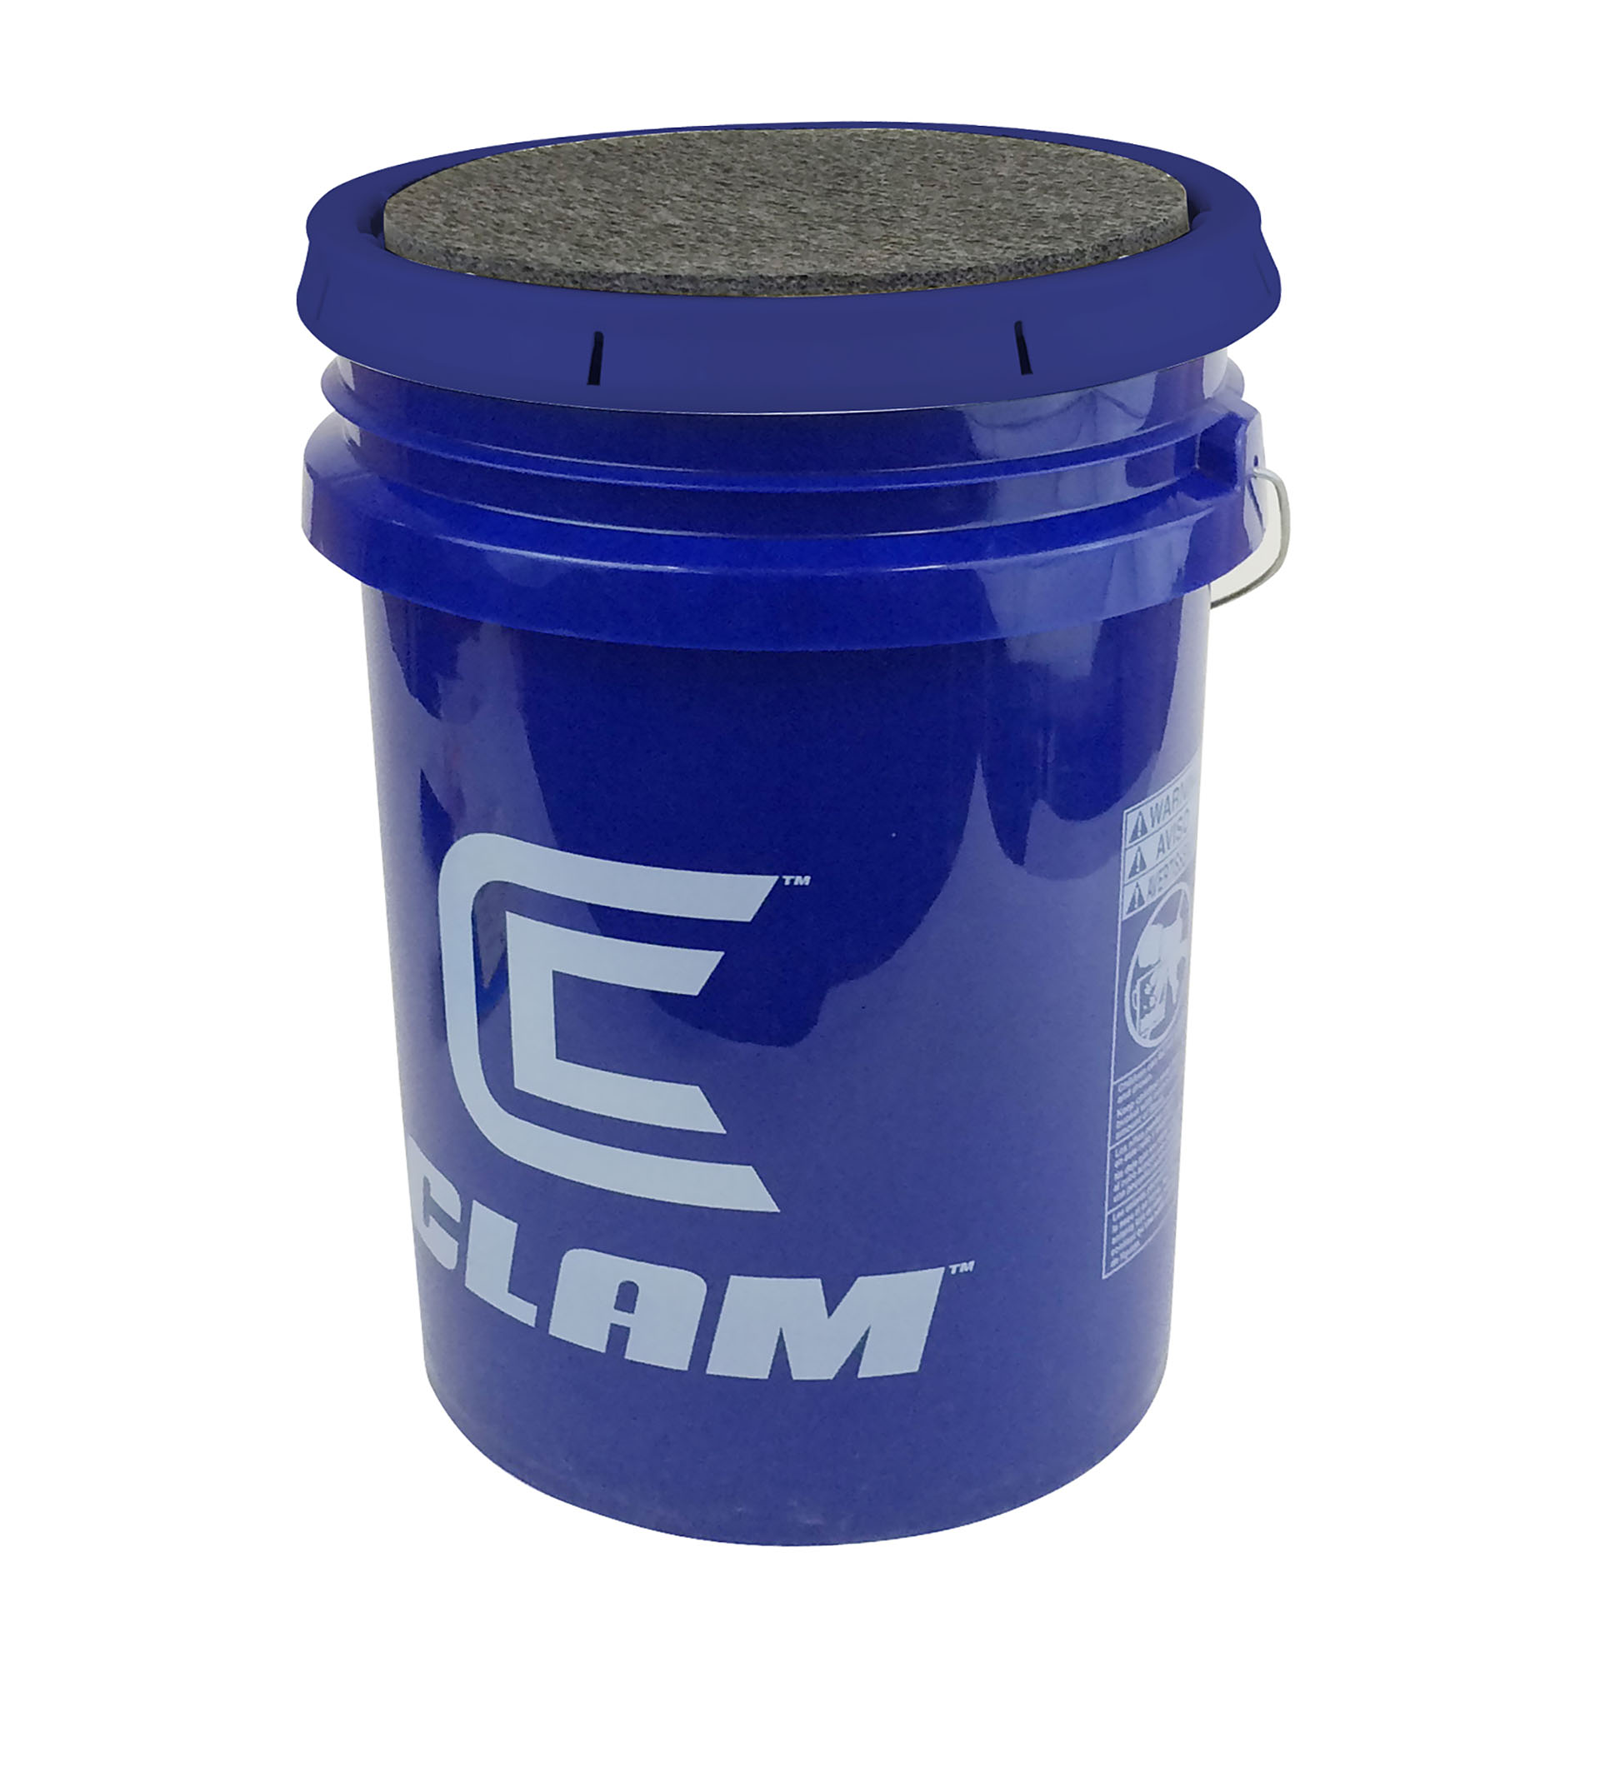 https://static.upnorthsports.com/Image/catimages/10156_6-Gallon-Bucket-Blue-Lid-1600.png